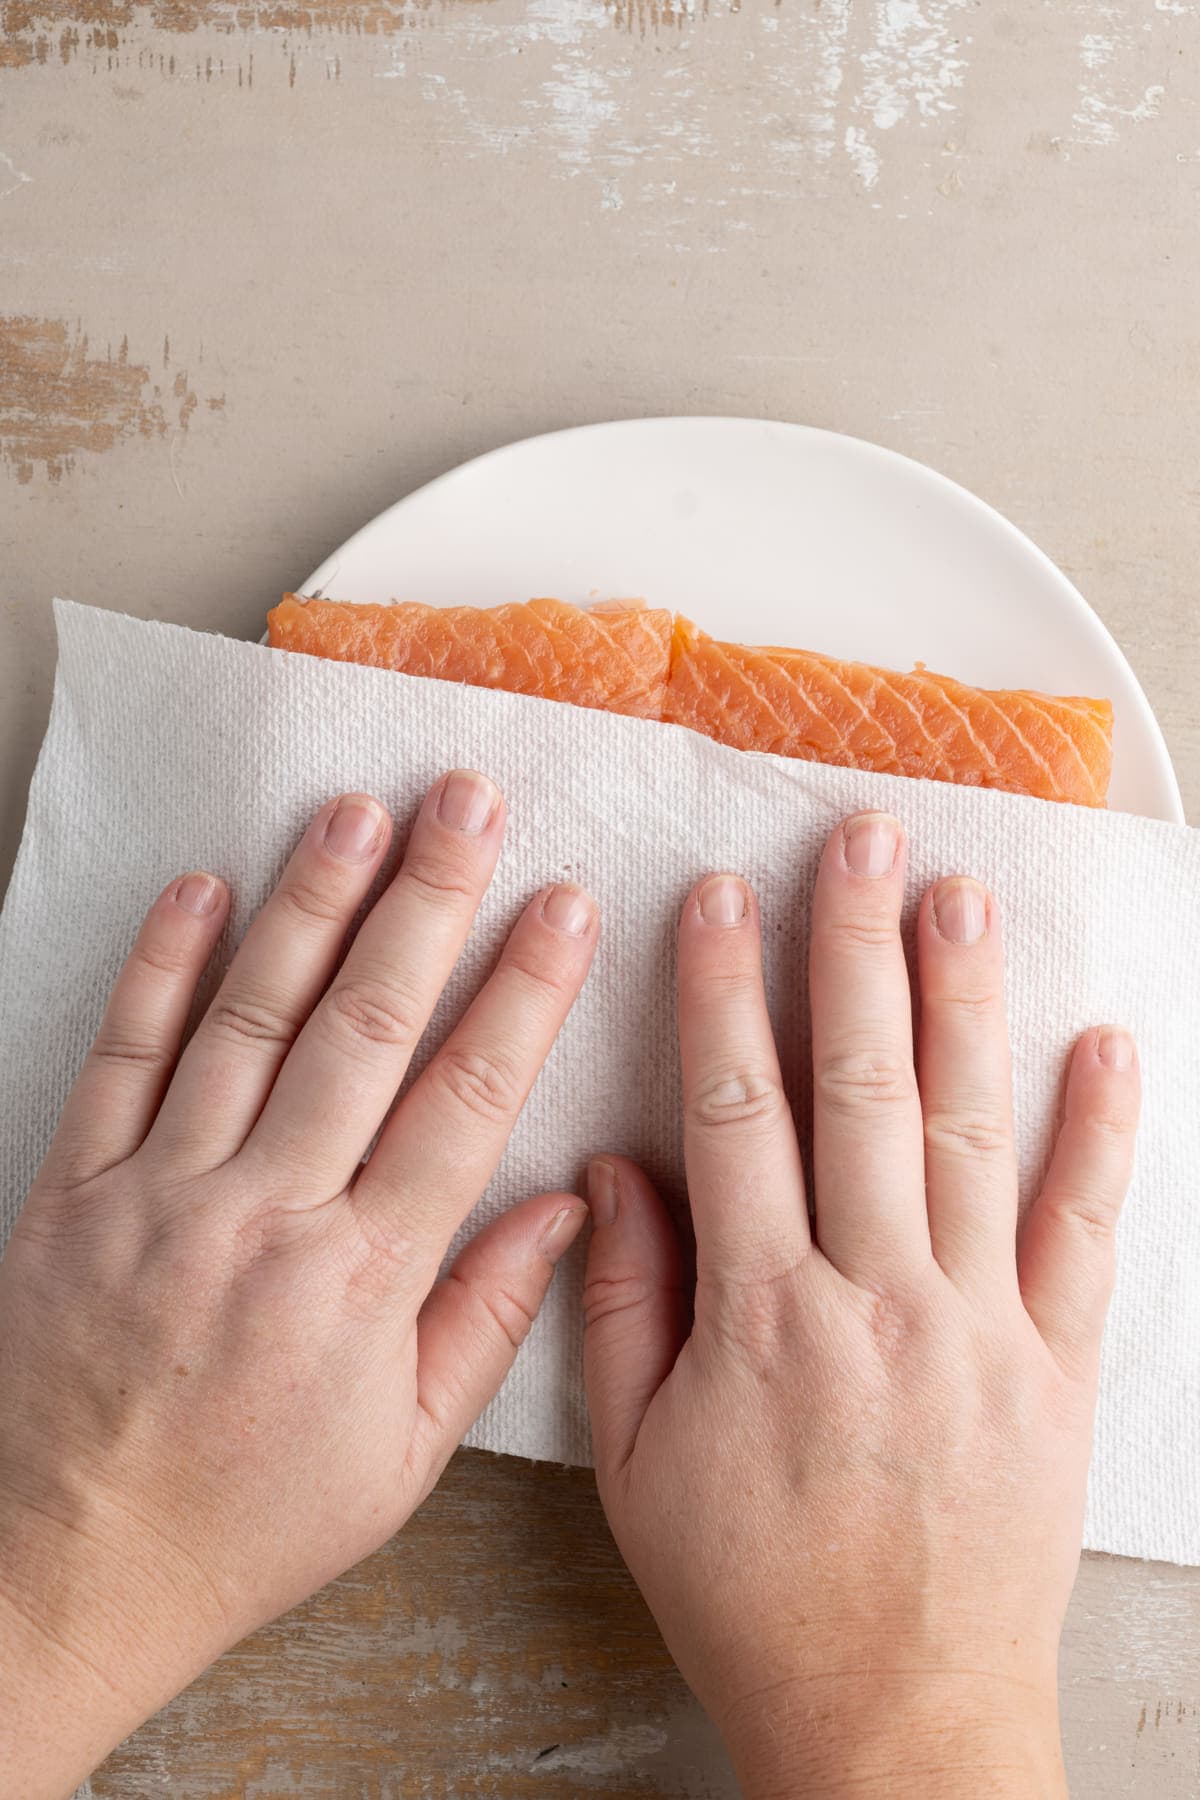 Removing excess moisture from salmon by blotting with paper towels